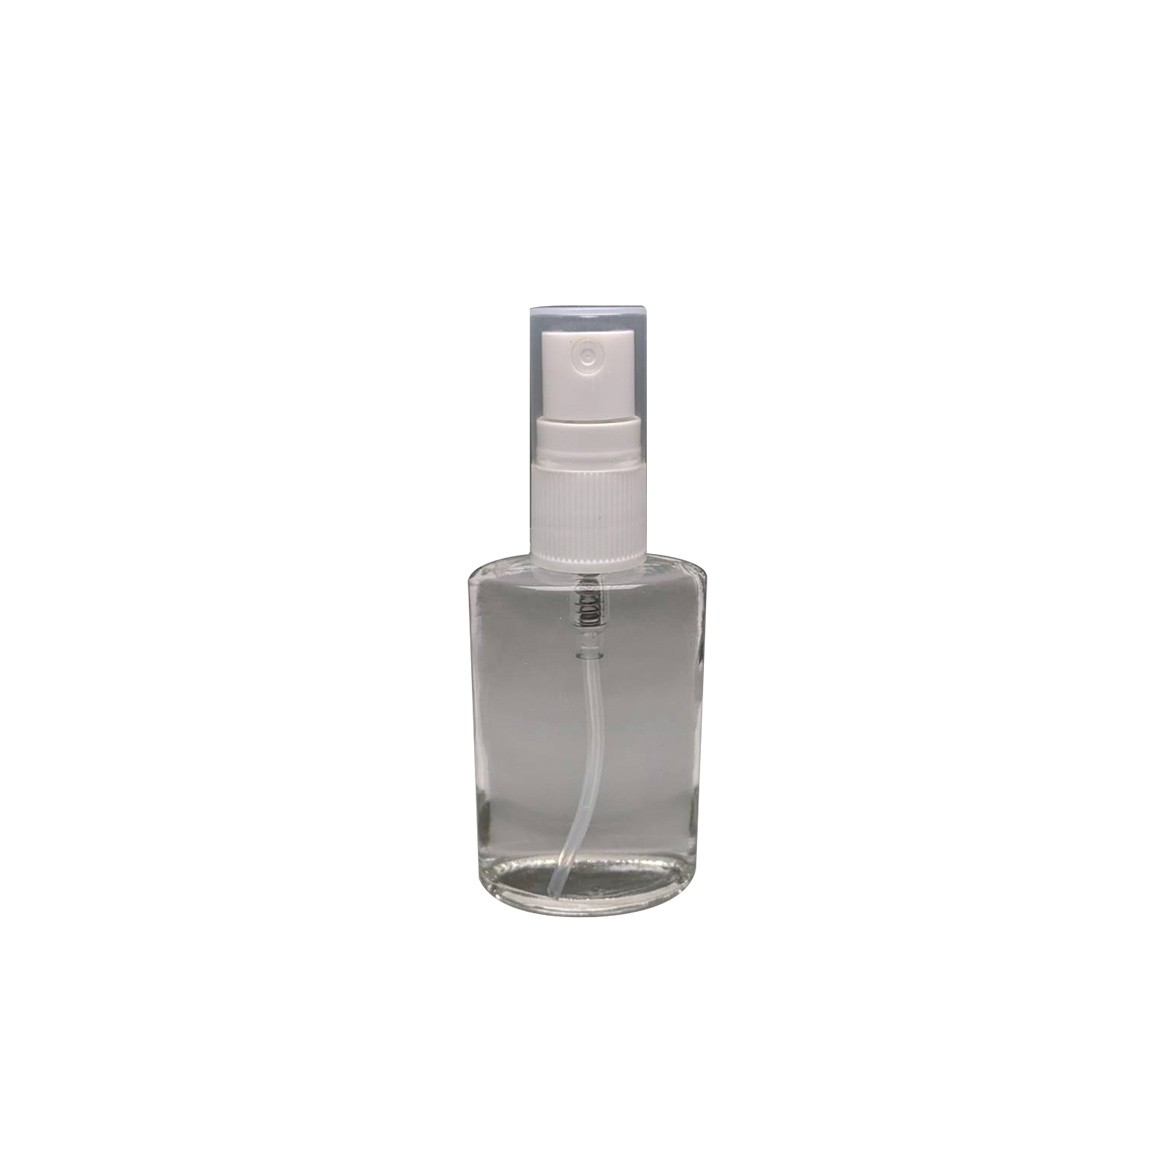 Multifunctional empty 35ml glass bottle unique shape with ribbed collar plastic mist sprayer